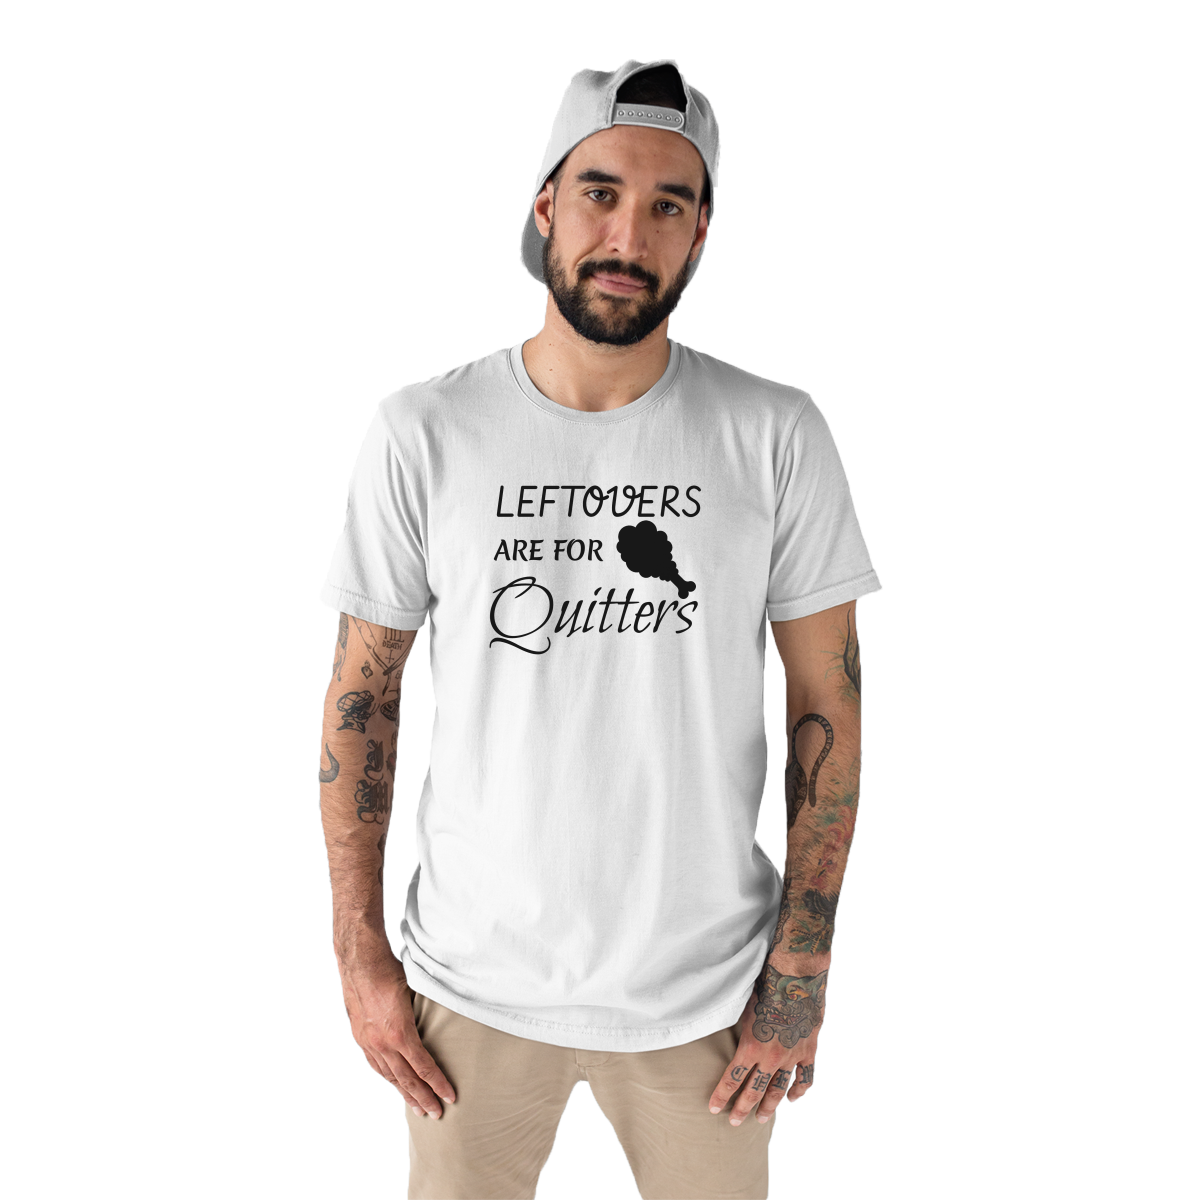 Leftovers Are For Quitters Men's T-shirt | White